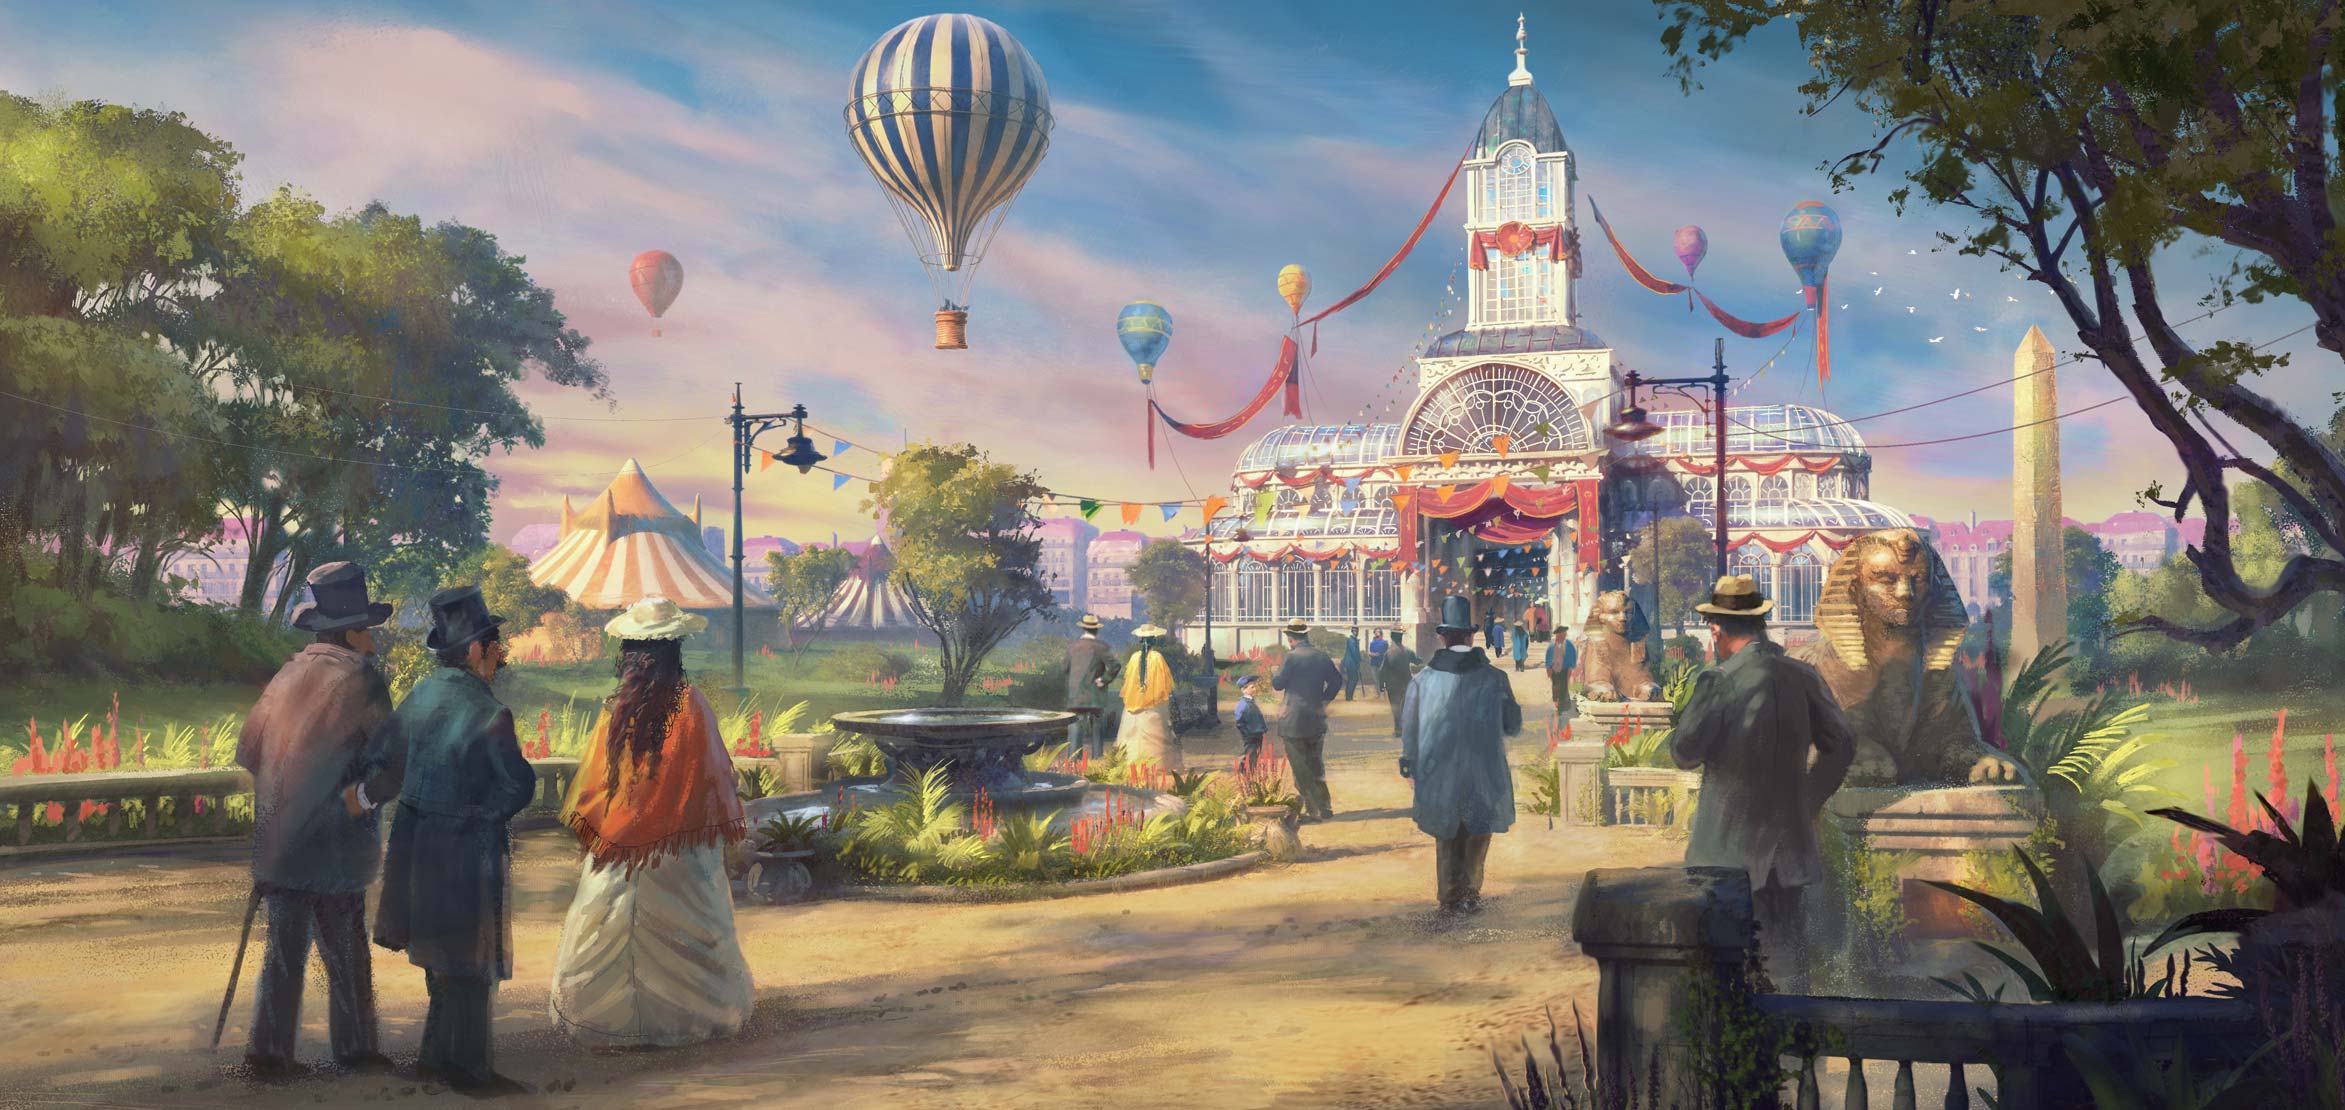 Illustration Video Games Forge Of Empires Building Video Game Art People Hot Air Balloons Trees Vict 2345x1110